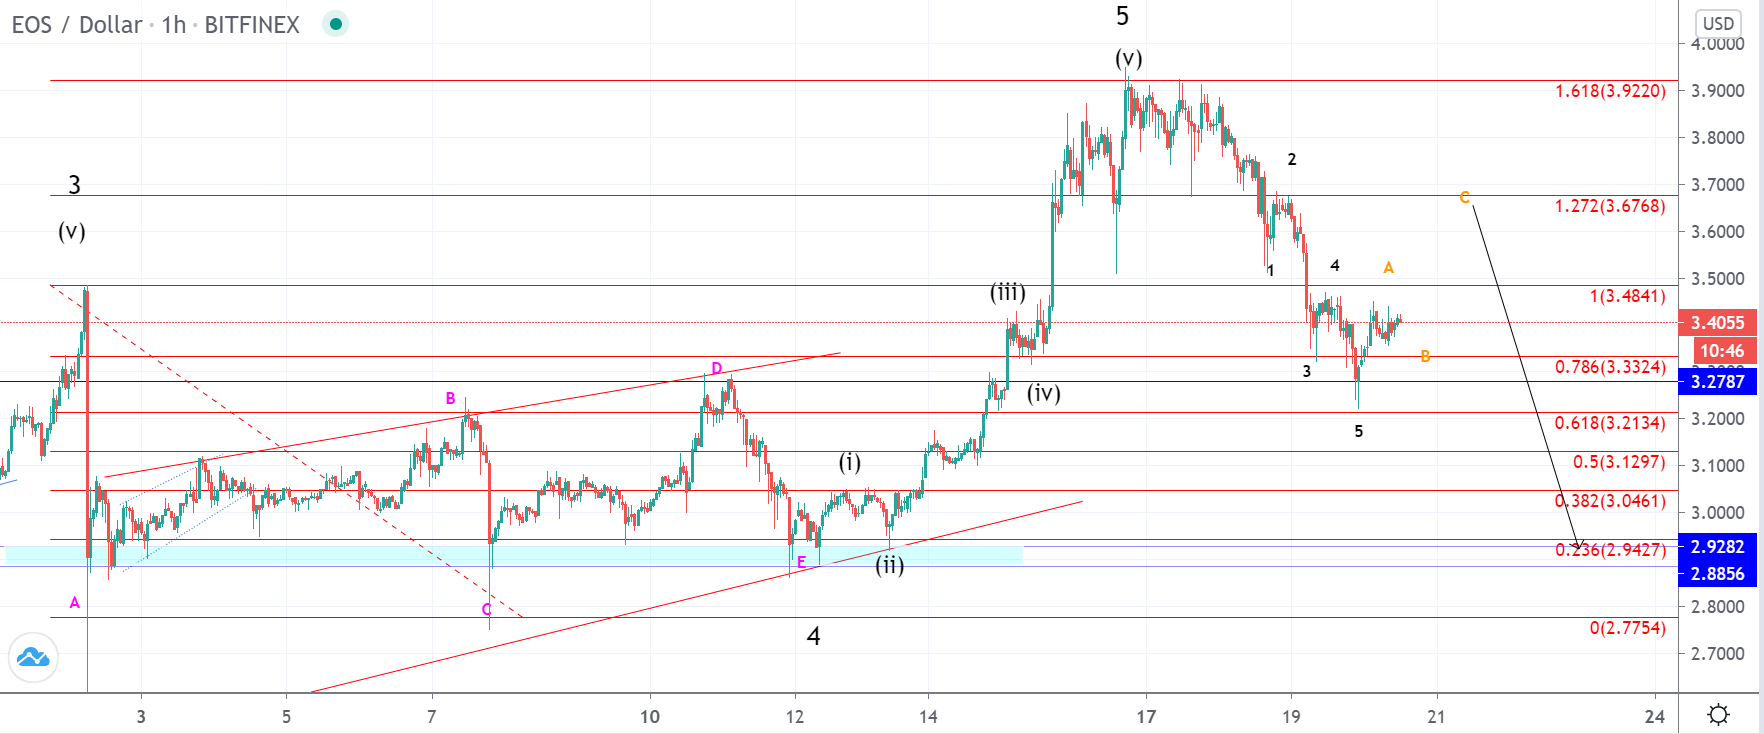 LTC and EOS - Correctional upside after downward impulse expected